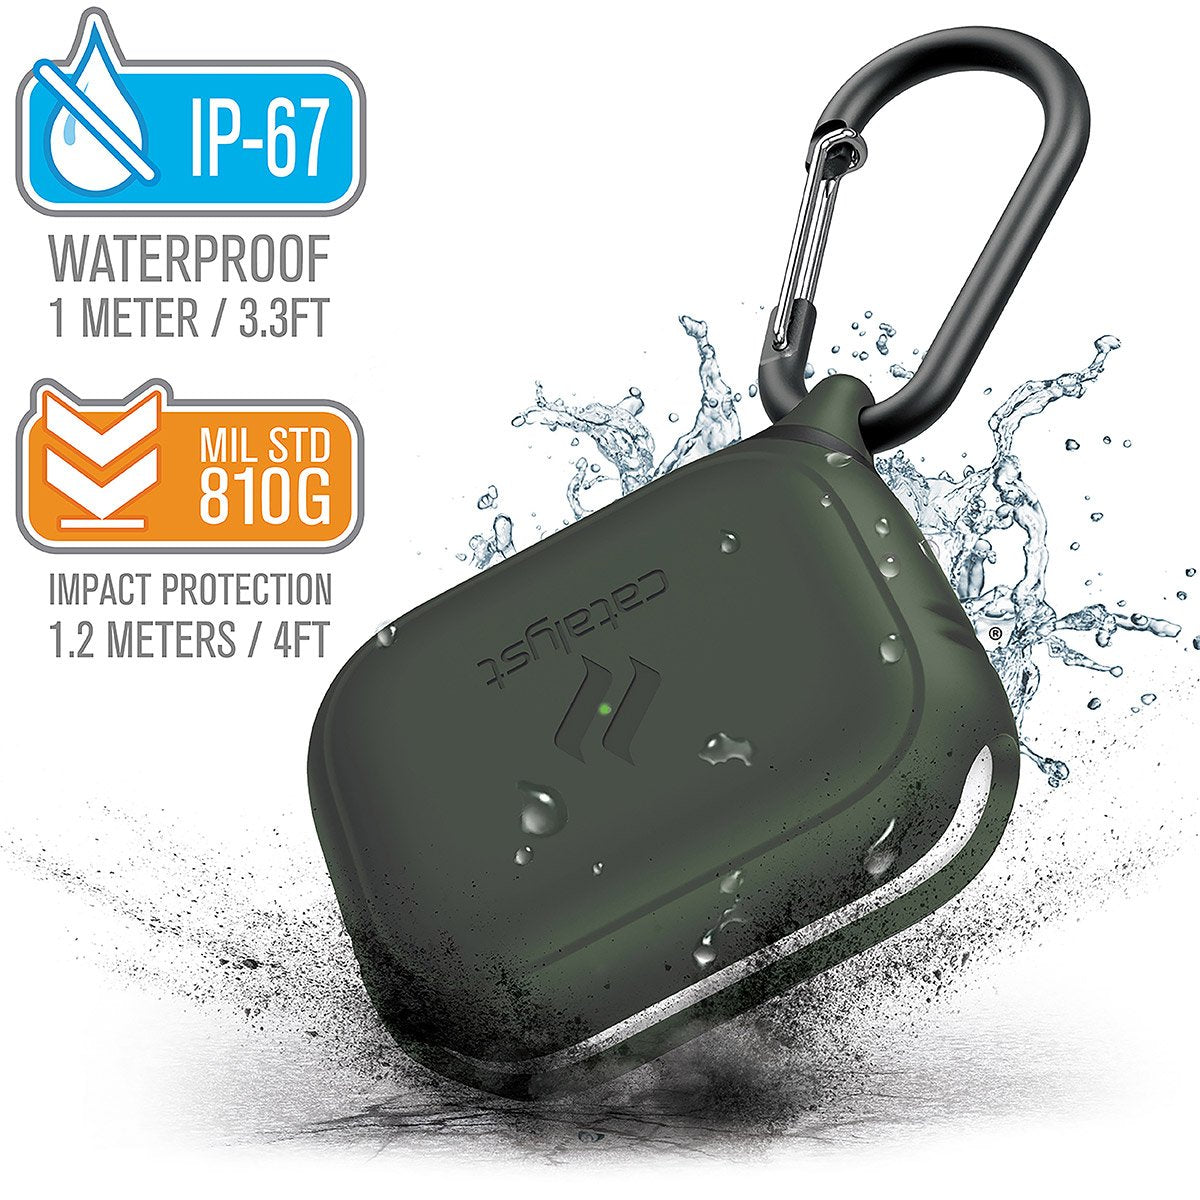 CATAPDPROGRN | catalyst airpods pro gen 2 1 waterproof case carabiner army green with cracked floor and splashes of water text reads ip-67 waterproof 1 meter 3.3ft mil std 810g impact protection 1.2 meters 4ft